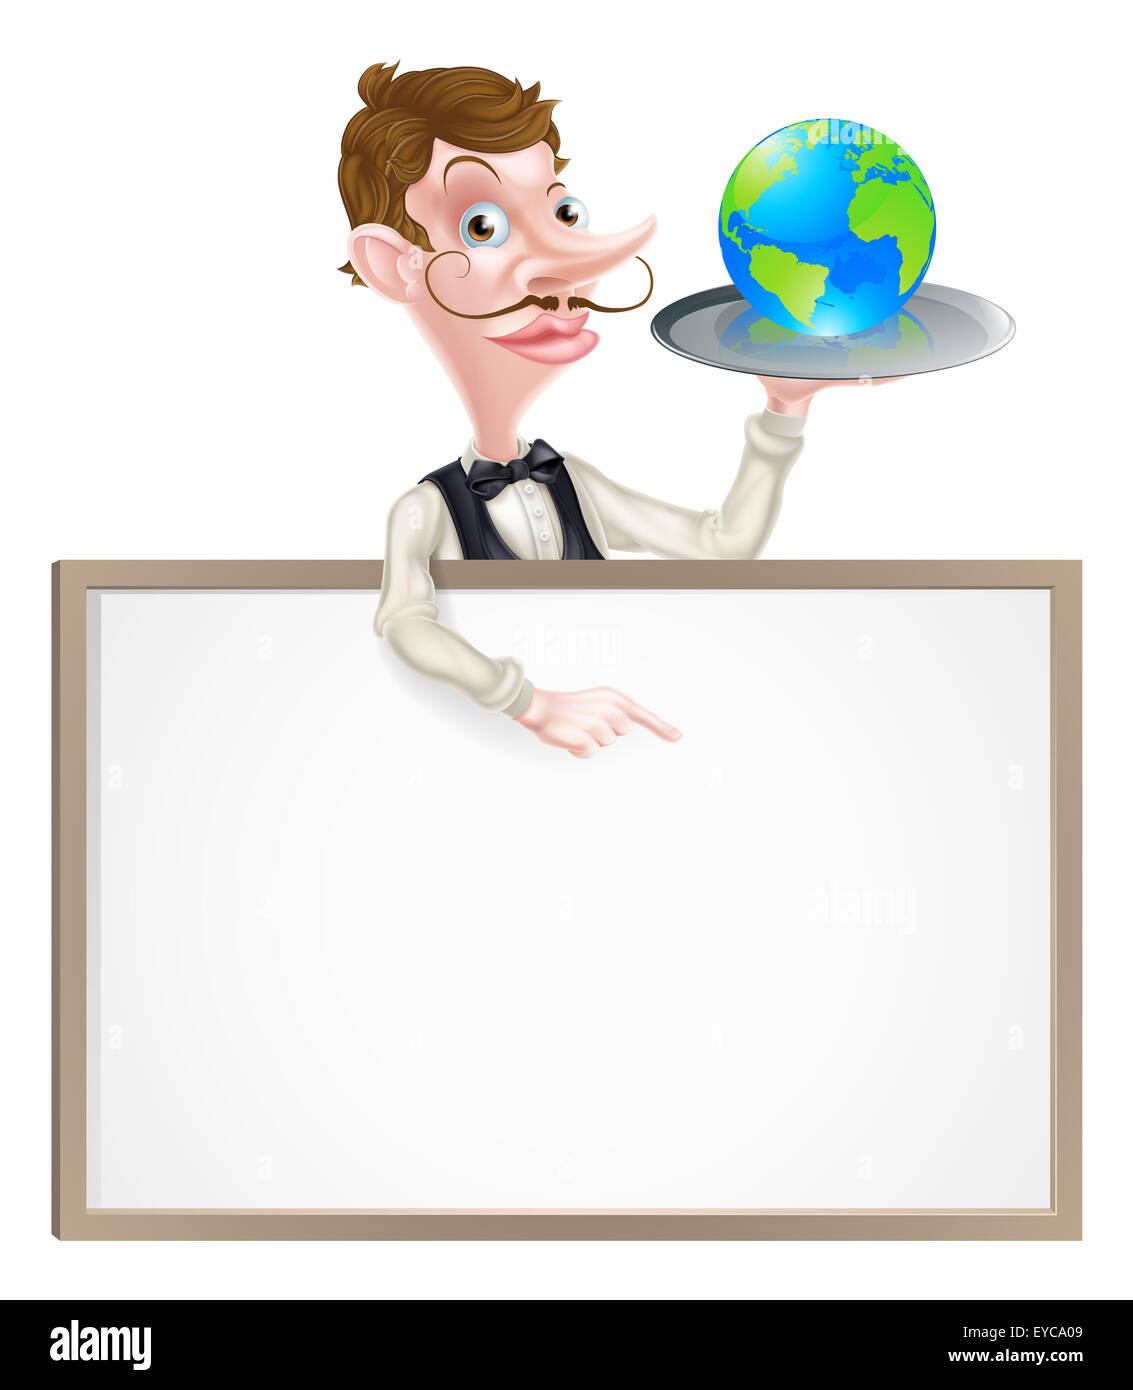 An illustration of a cartoon waiter holding a tray with a world globe on it  and pointing at a signboard Stock Photo